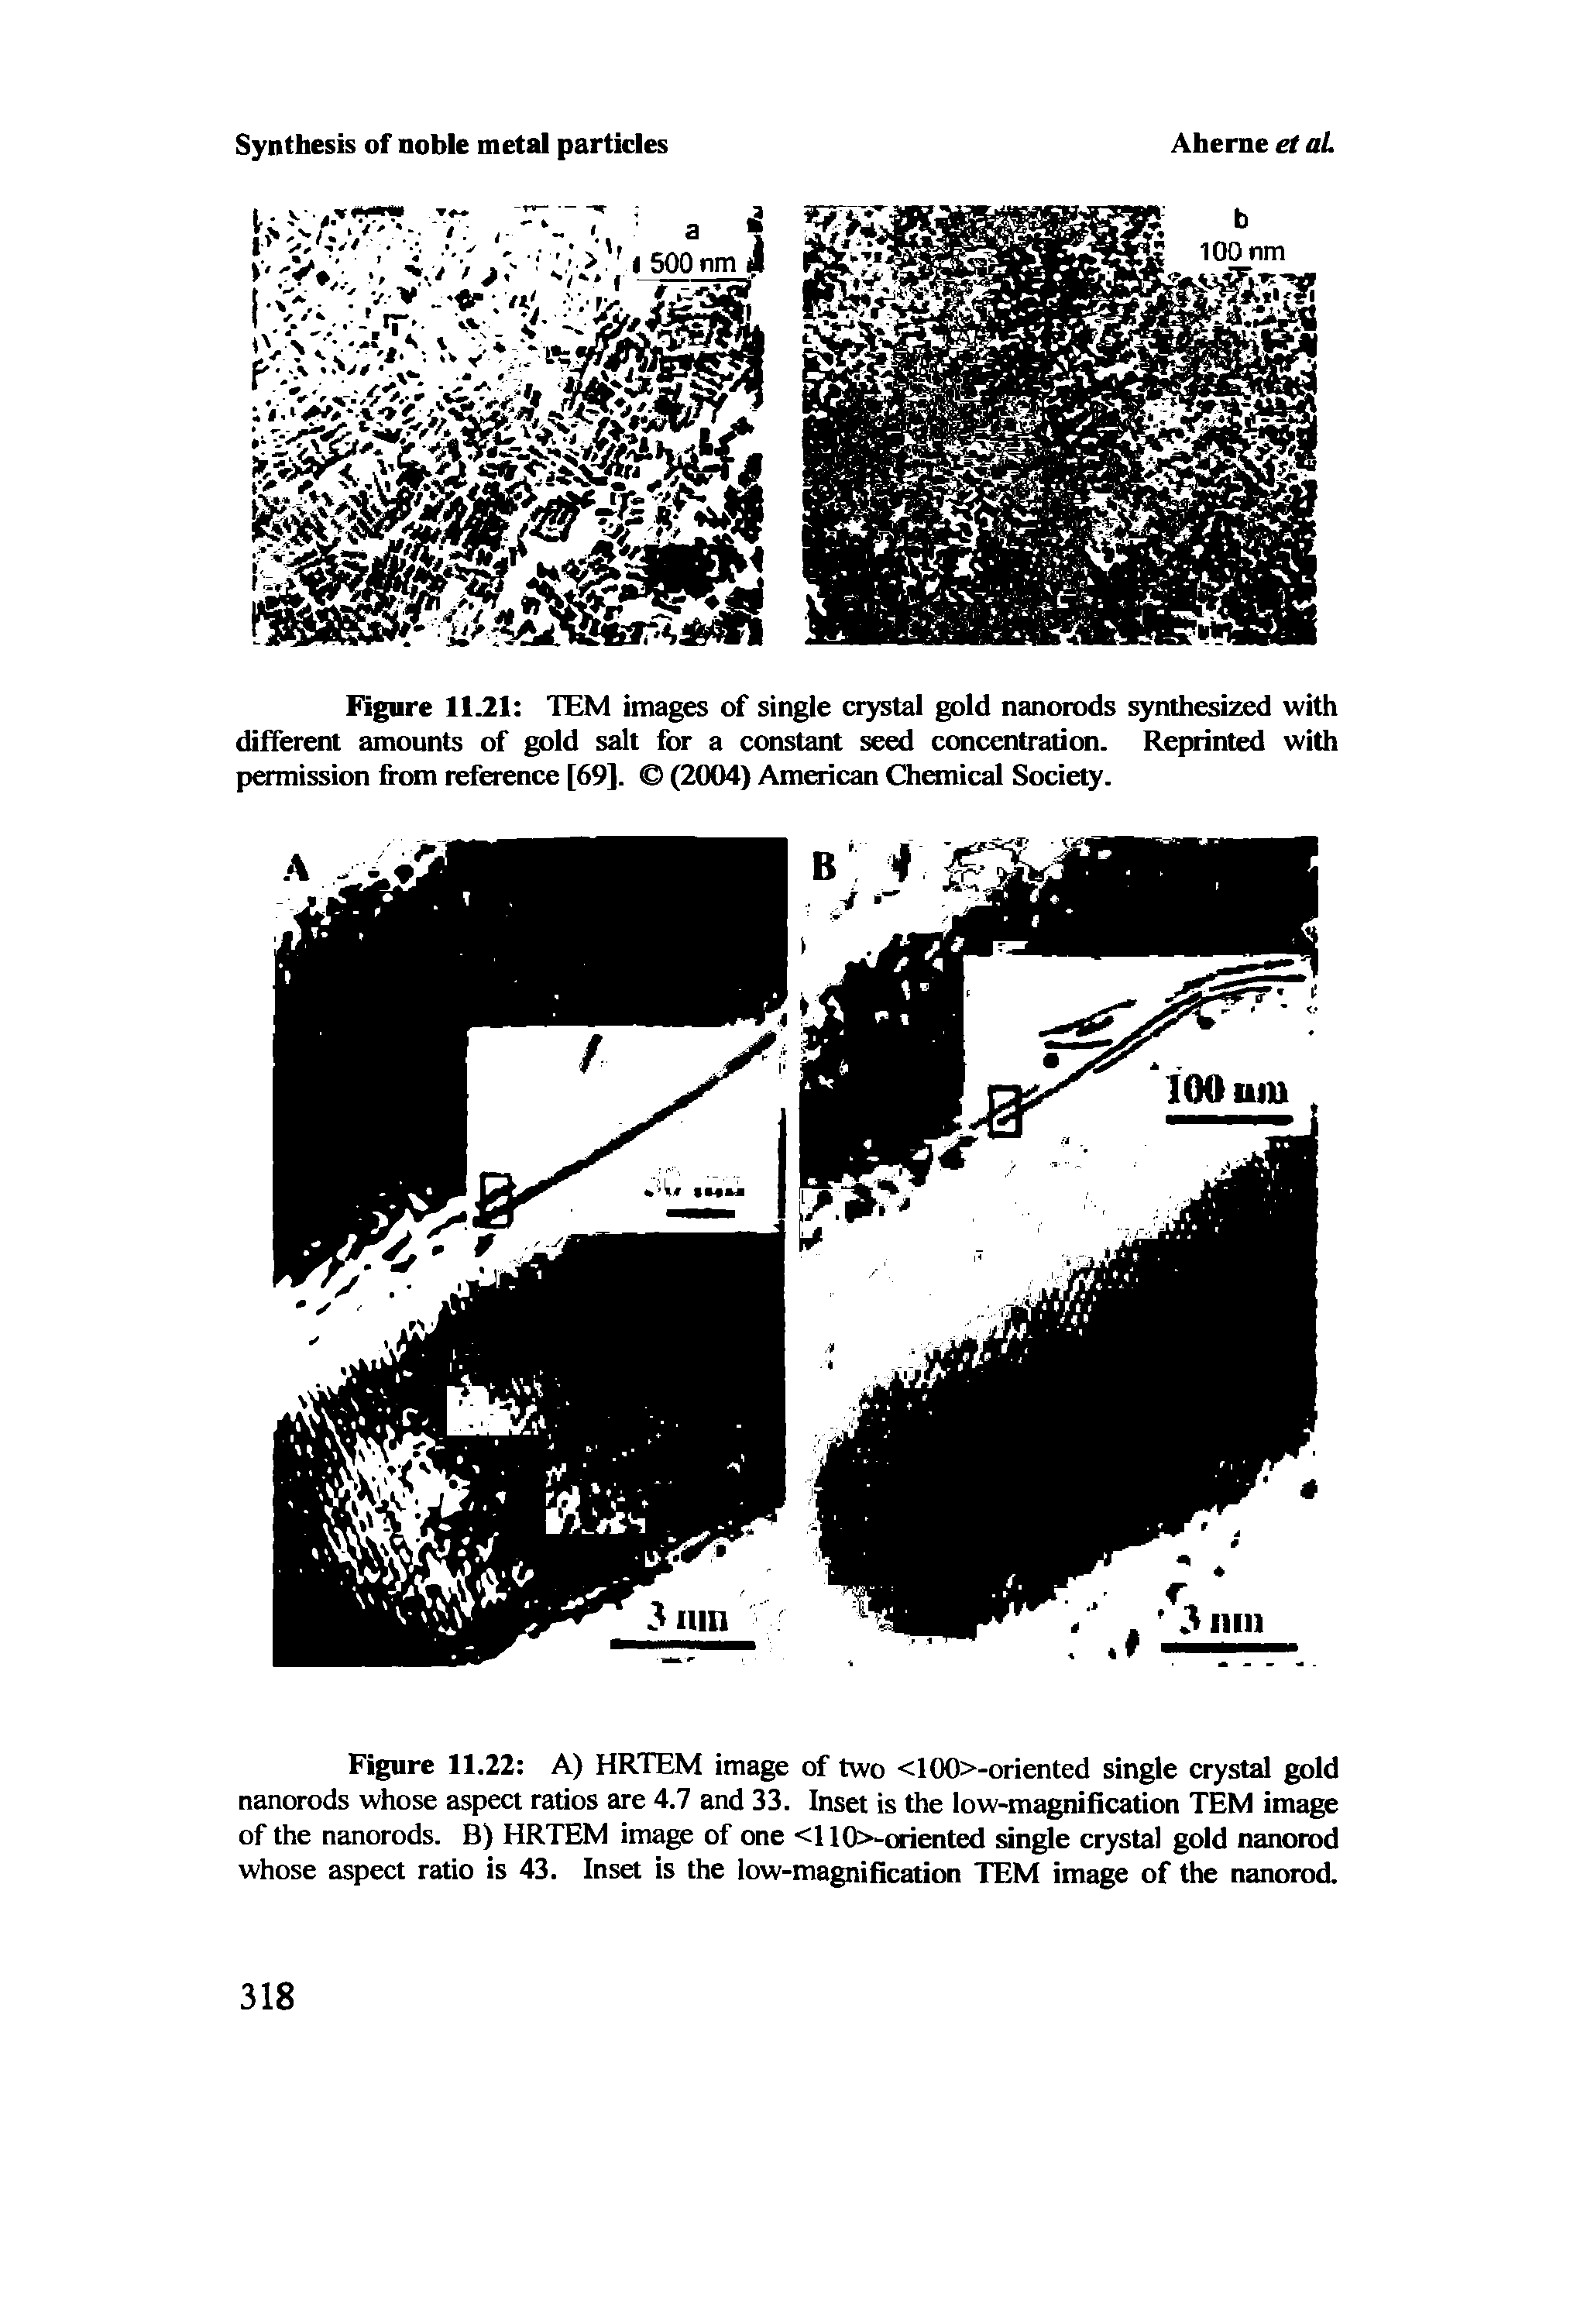 Figure 11 1 TEM images of single crystal gold nanorods synthesized with different amounts of gold salt for a constant seed concentration. Reprinted with permission from reference [69]. (2004) American Chemical Society.